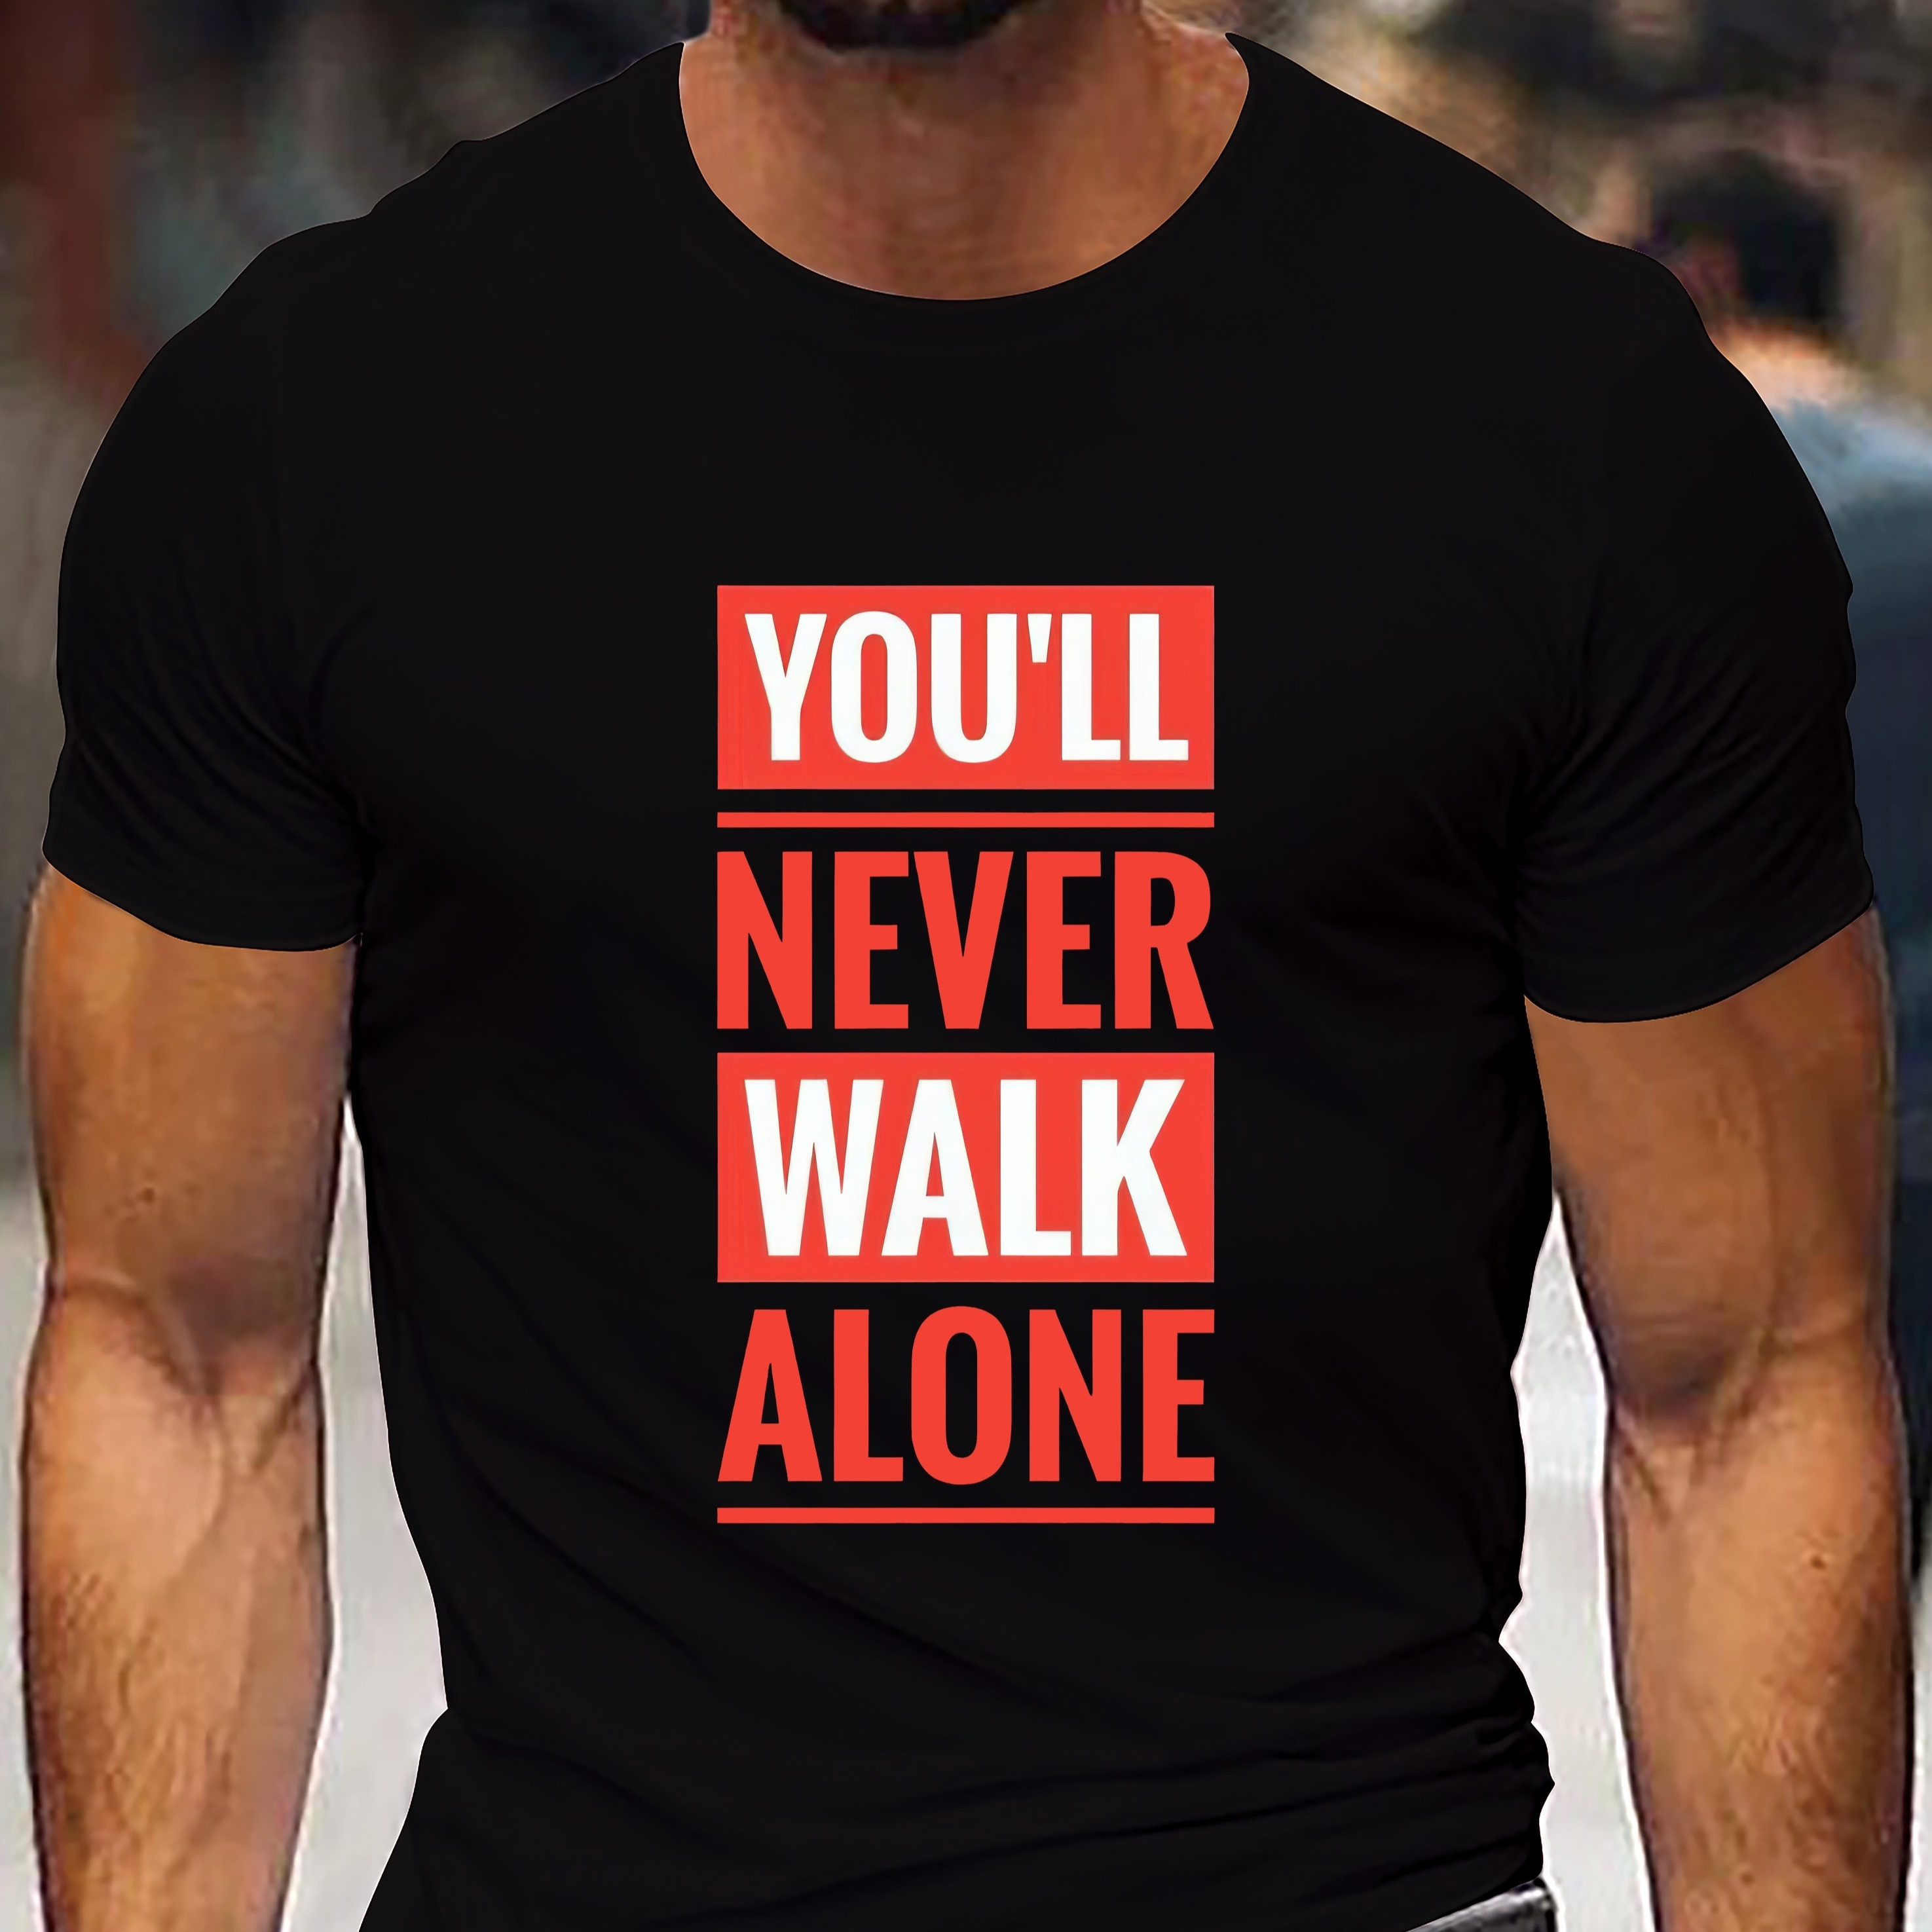 

You'll Never Walk Alone Print Men's Tee, Casual Style, Short Sleeve, Summer T-shirt, Round Neck, Soft Material Top